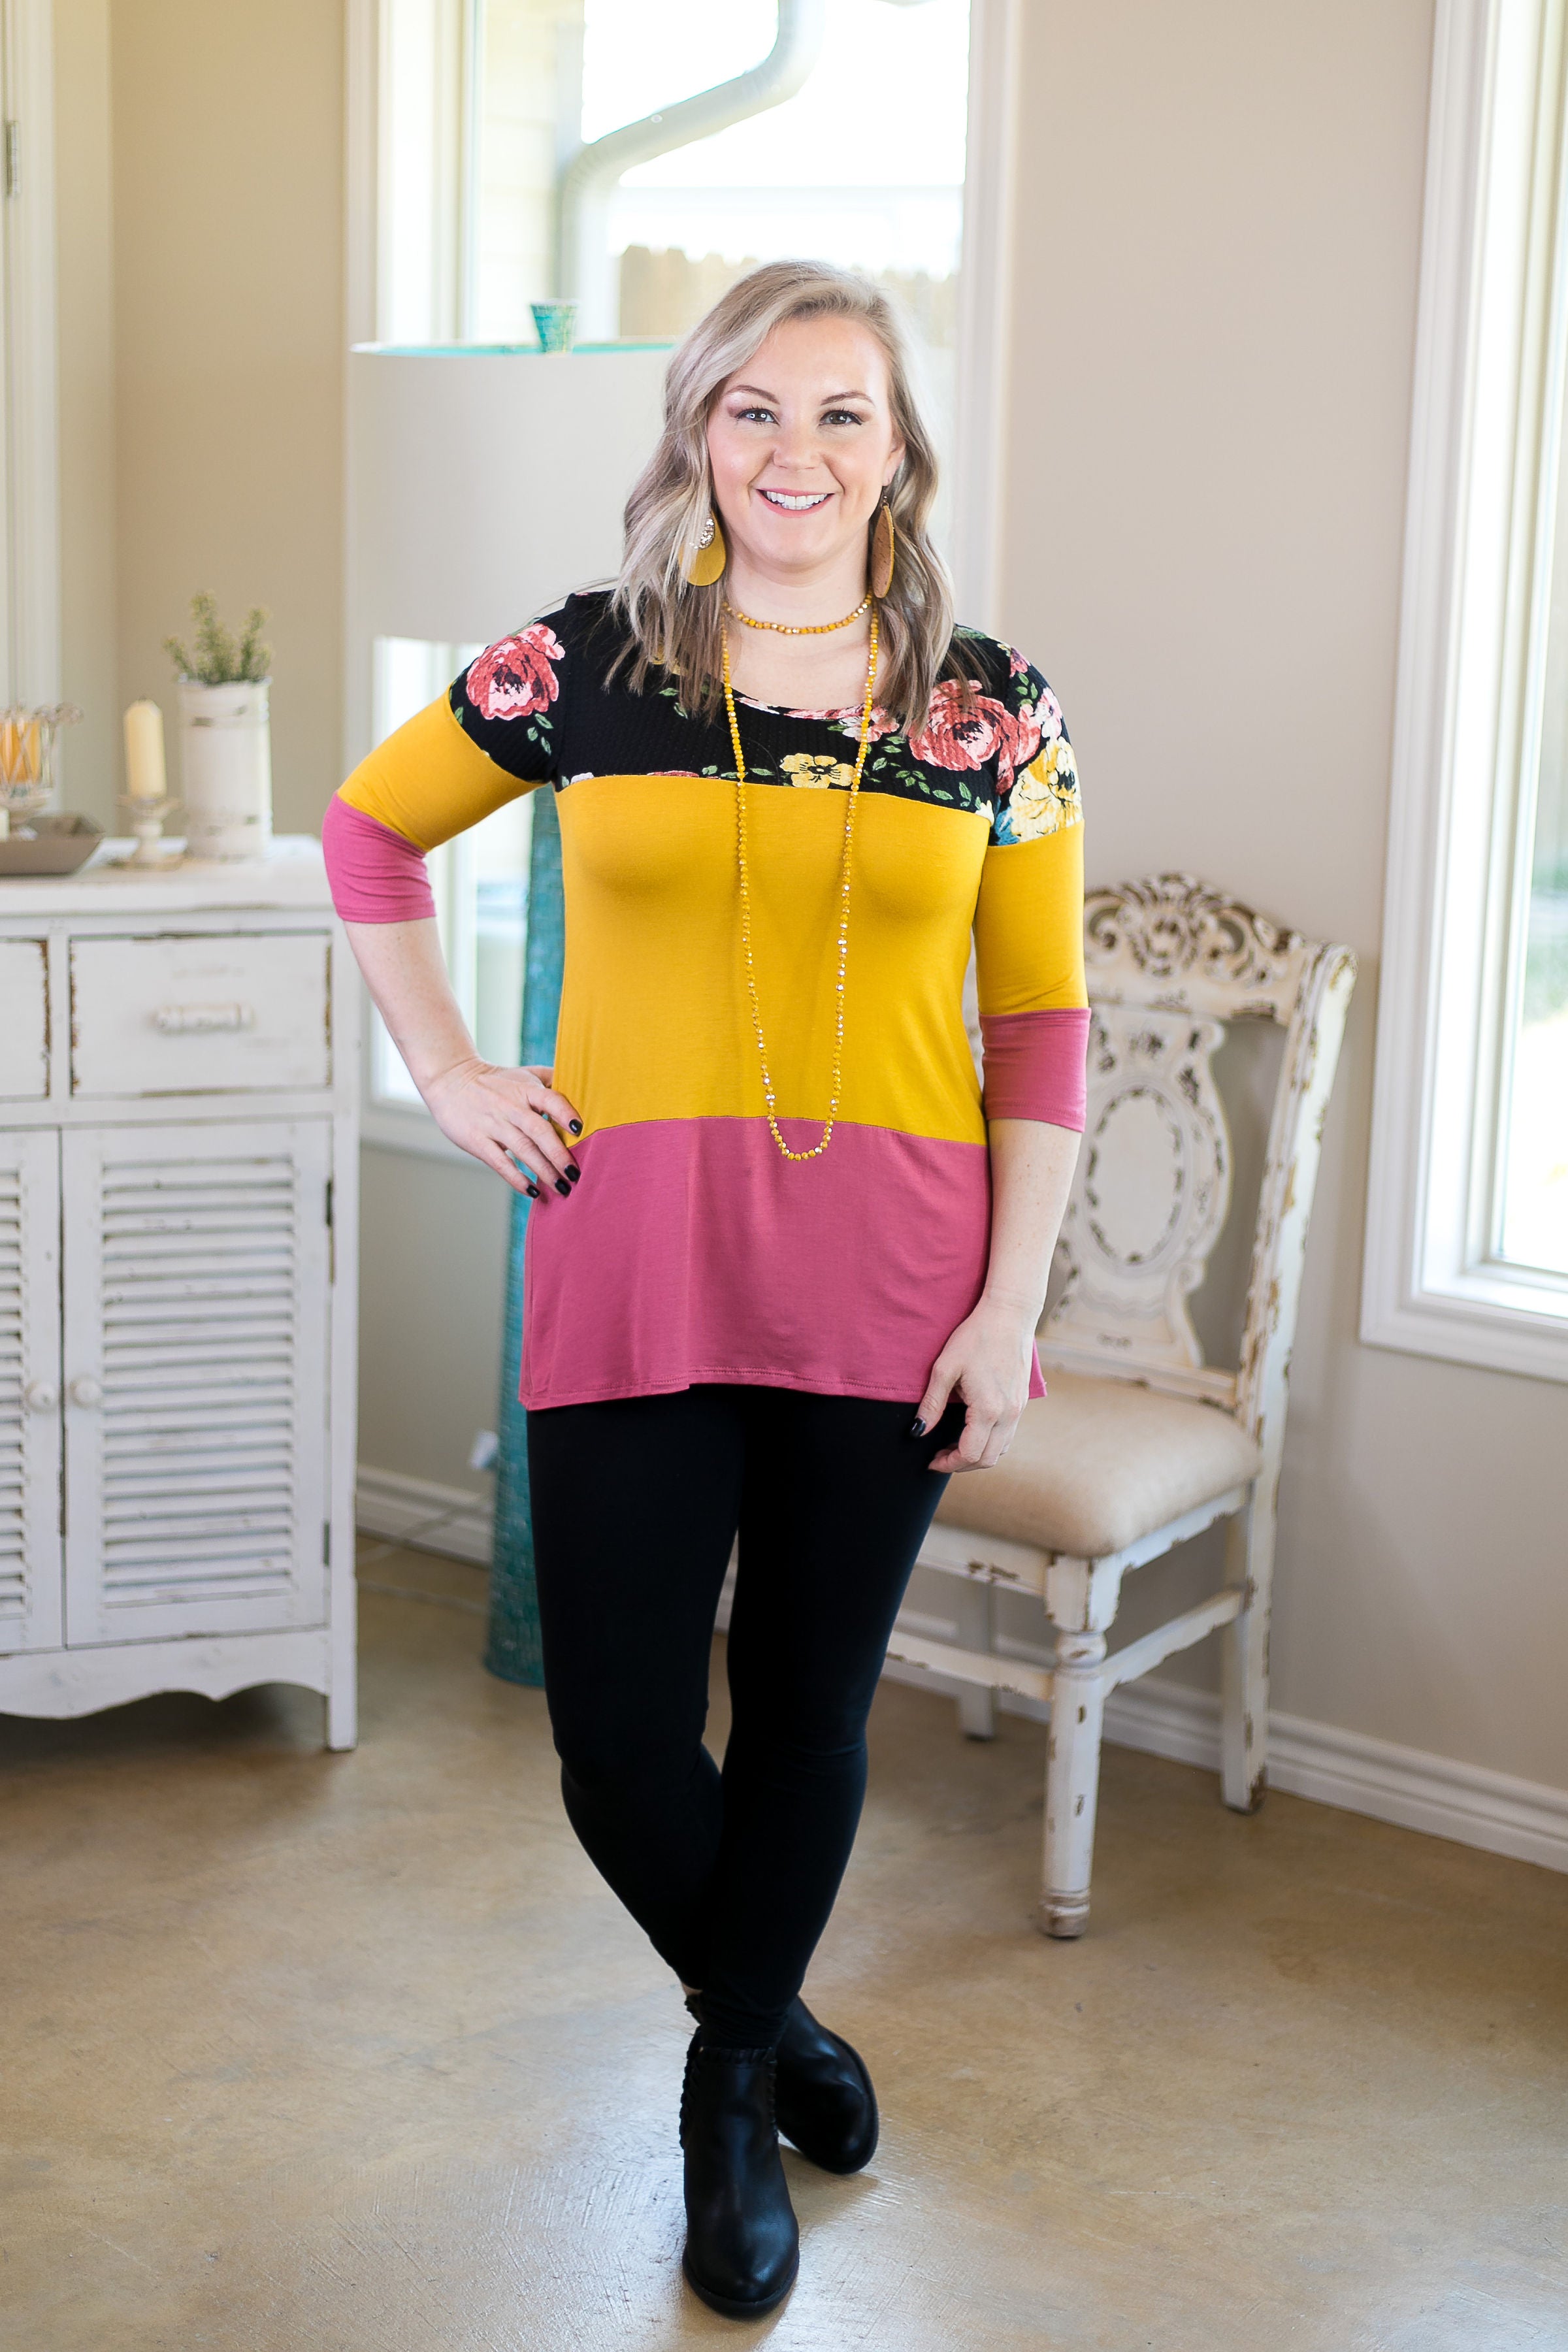 Last Chance Size S & M | Laugh Louder Floral Color Block Top with Buttons in Black - Giddy Up Glamour Boutique